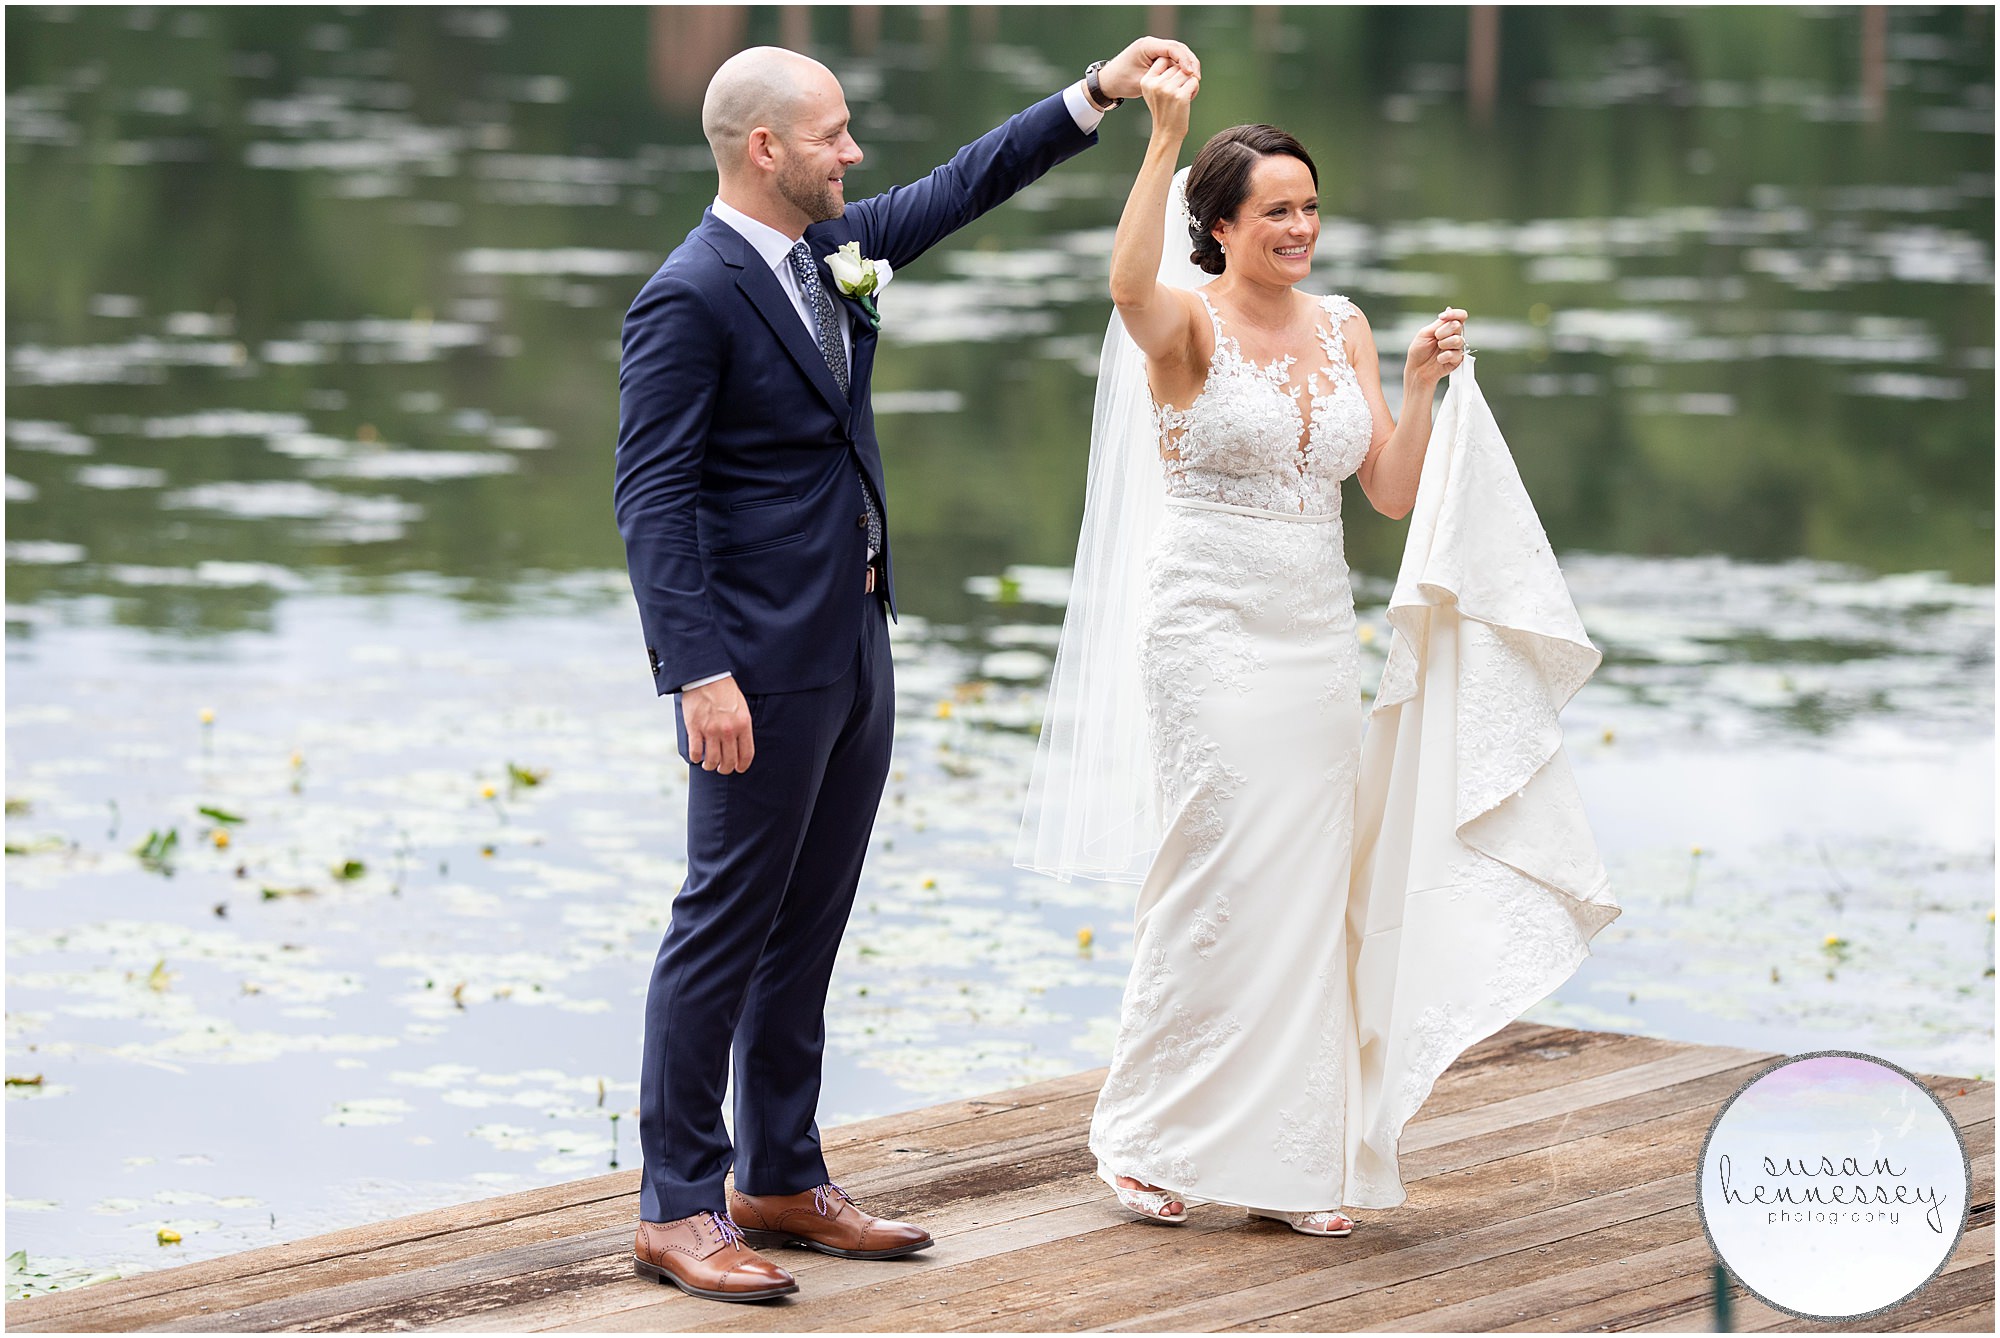 Couple's Philadelphia wedding becomes a backyard wedding in South Jersey due to COVID-19